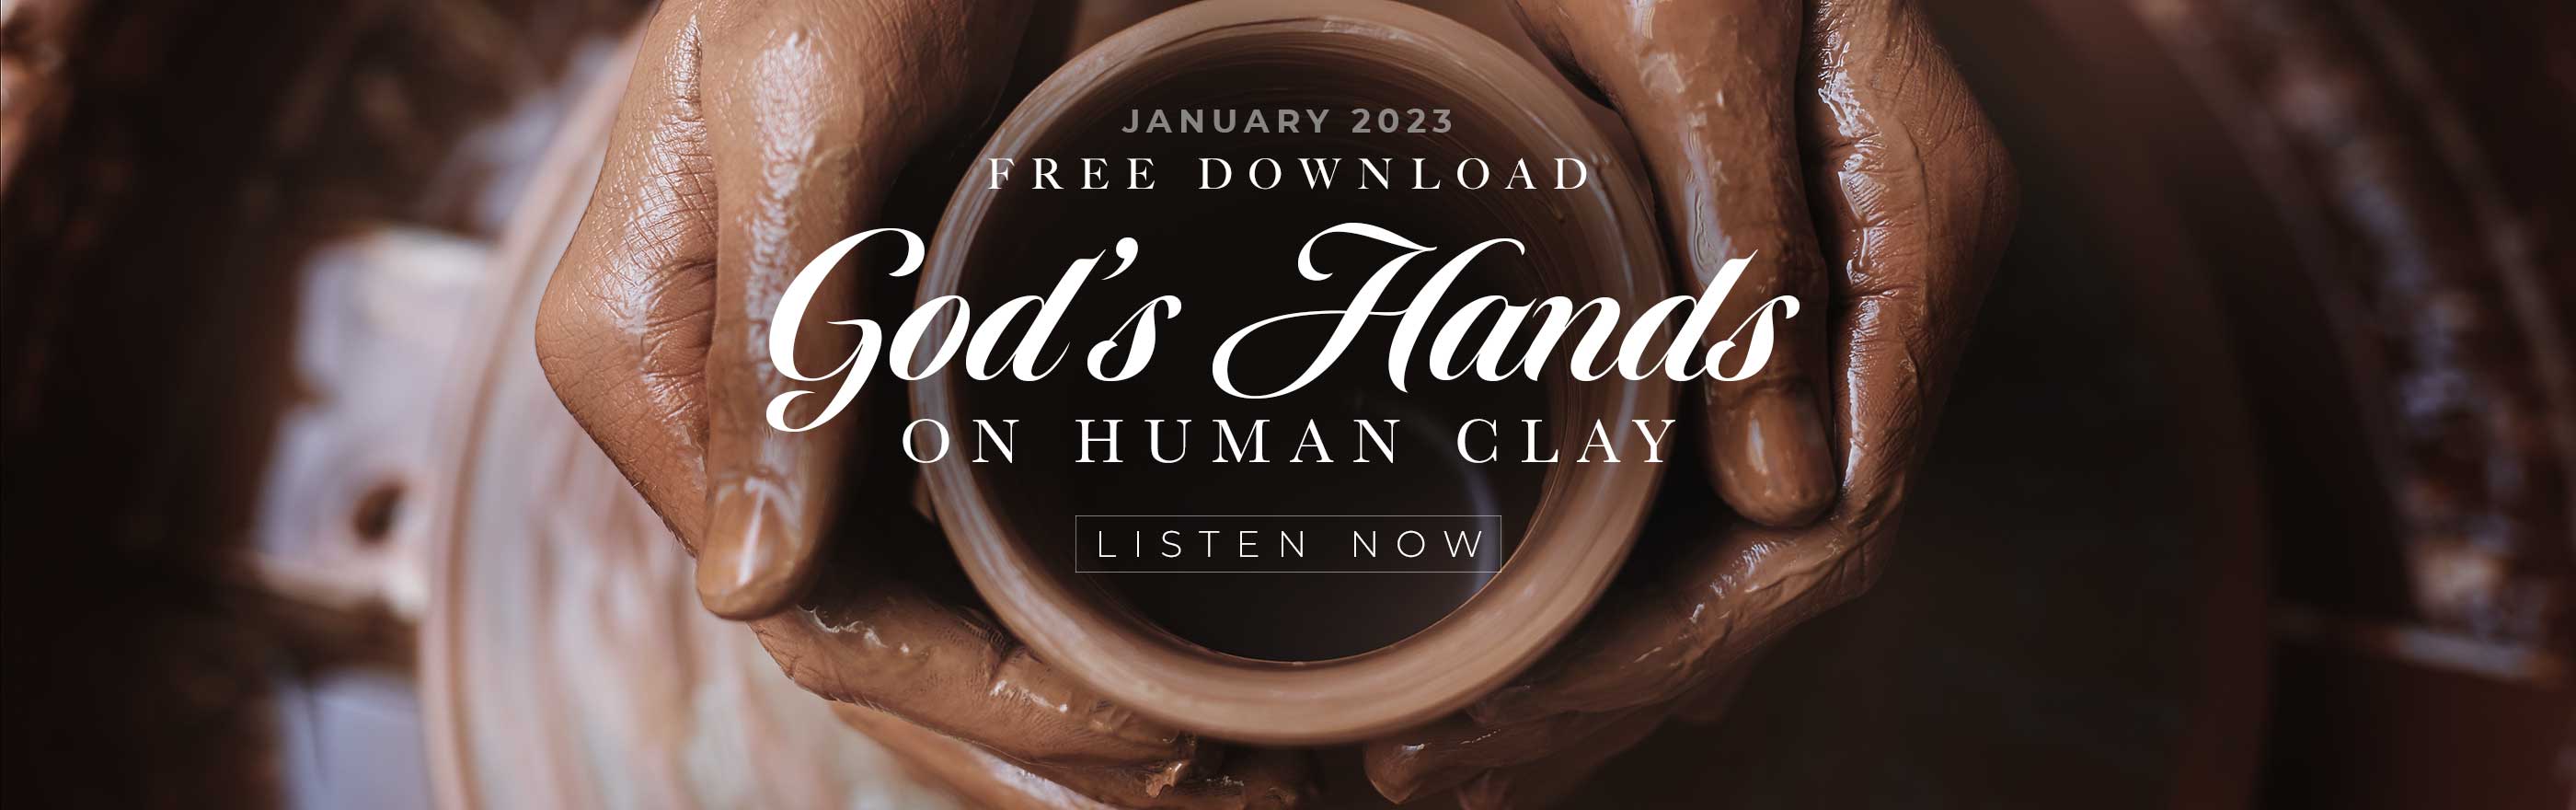 This Month's Free Download